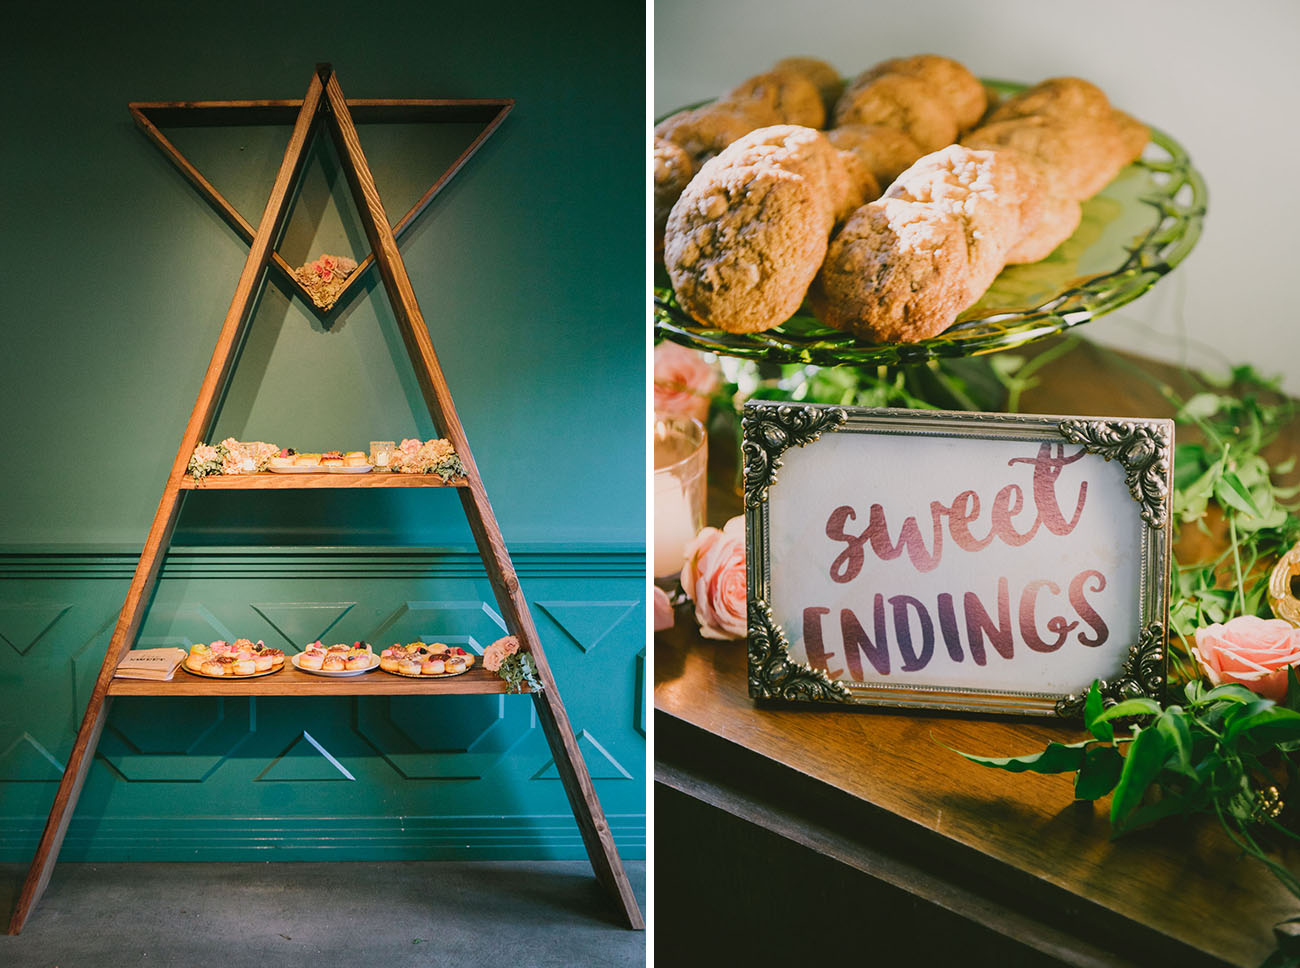 Colorful Fig House Wedding